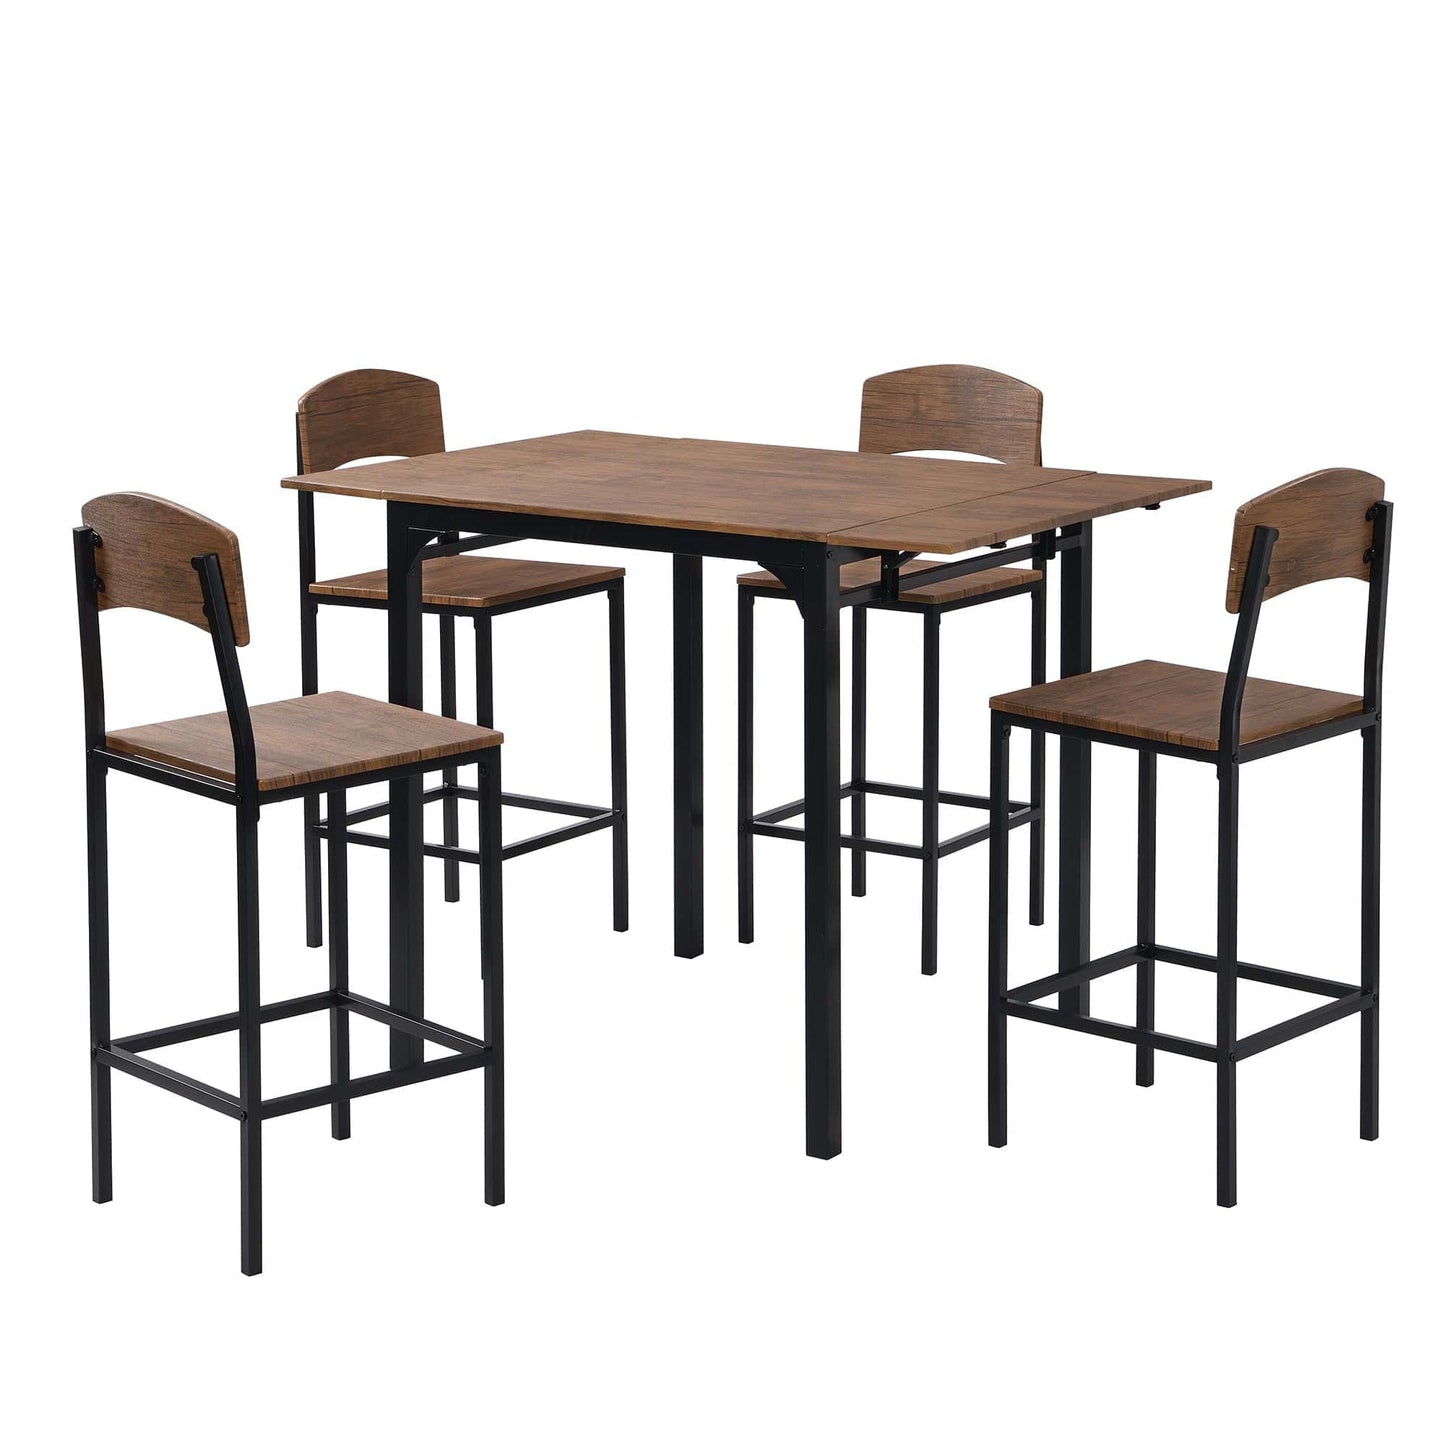 TOPMAX Farmhouse 5-piece Counter Height Drop Leaf Dining Table Set with Dining Chairs for 4,Black Frame+Brown Tabletop - CLASSY CLOSET BOUTIQUETOPMAX Farmhouse 5-piece Counter Height Drop Leaf Dining Table Set with Dining Chairs for 4,Black Frame+Brown TabletopWF290233AAB